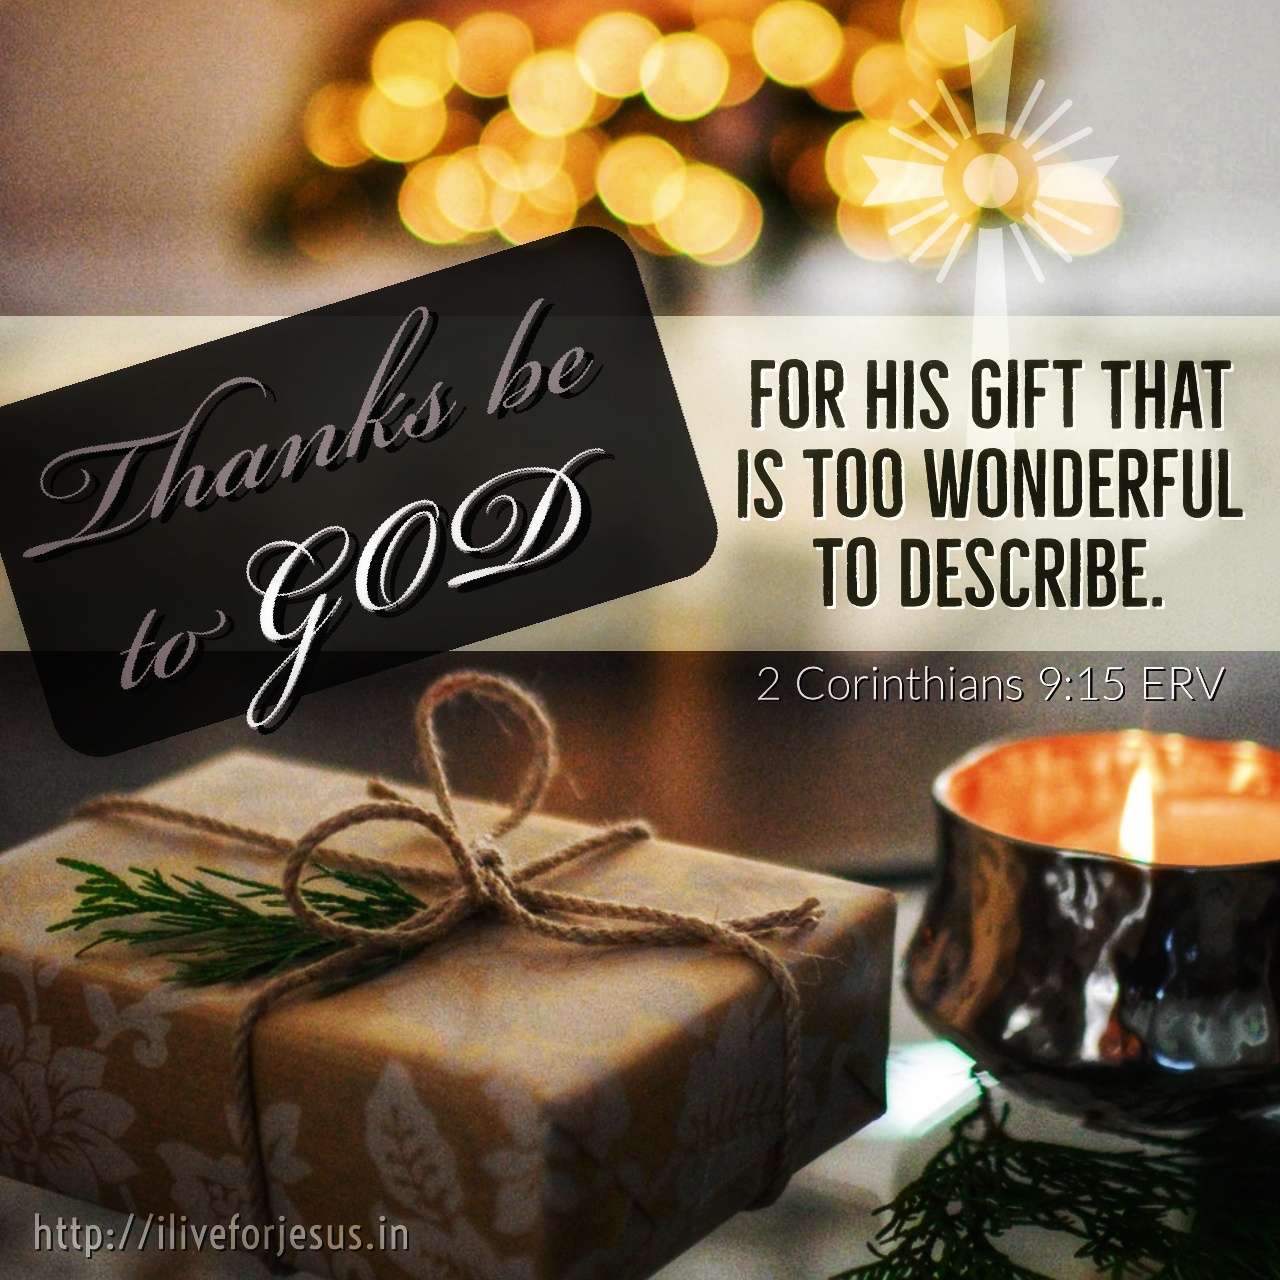 Thanks be to God for his gift that is too wonderful to describe. 2 Corinthians 9:15 ERV